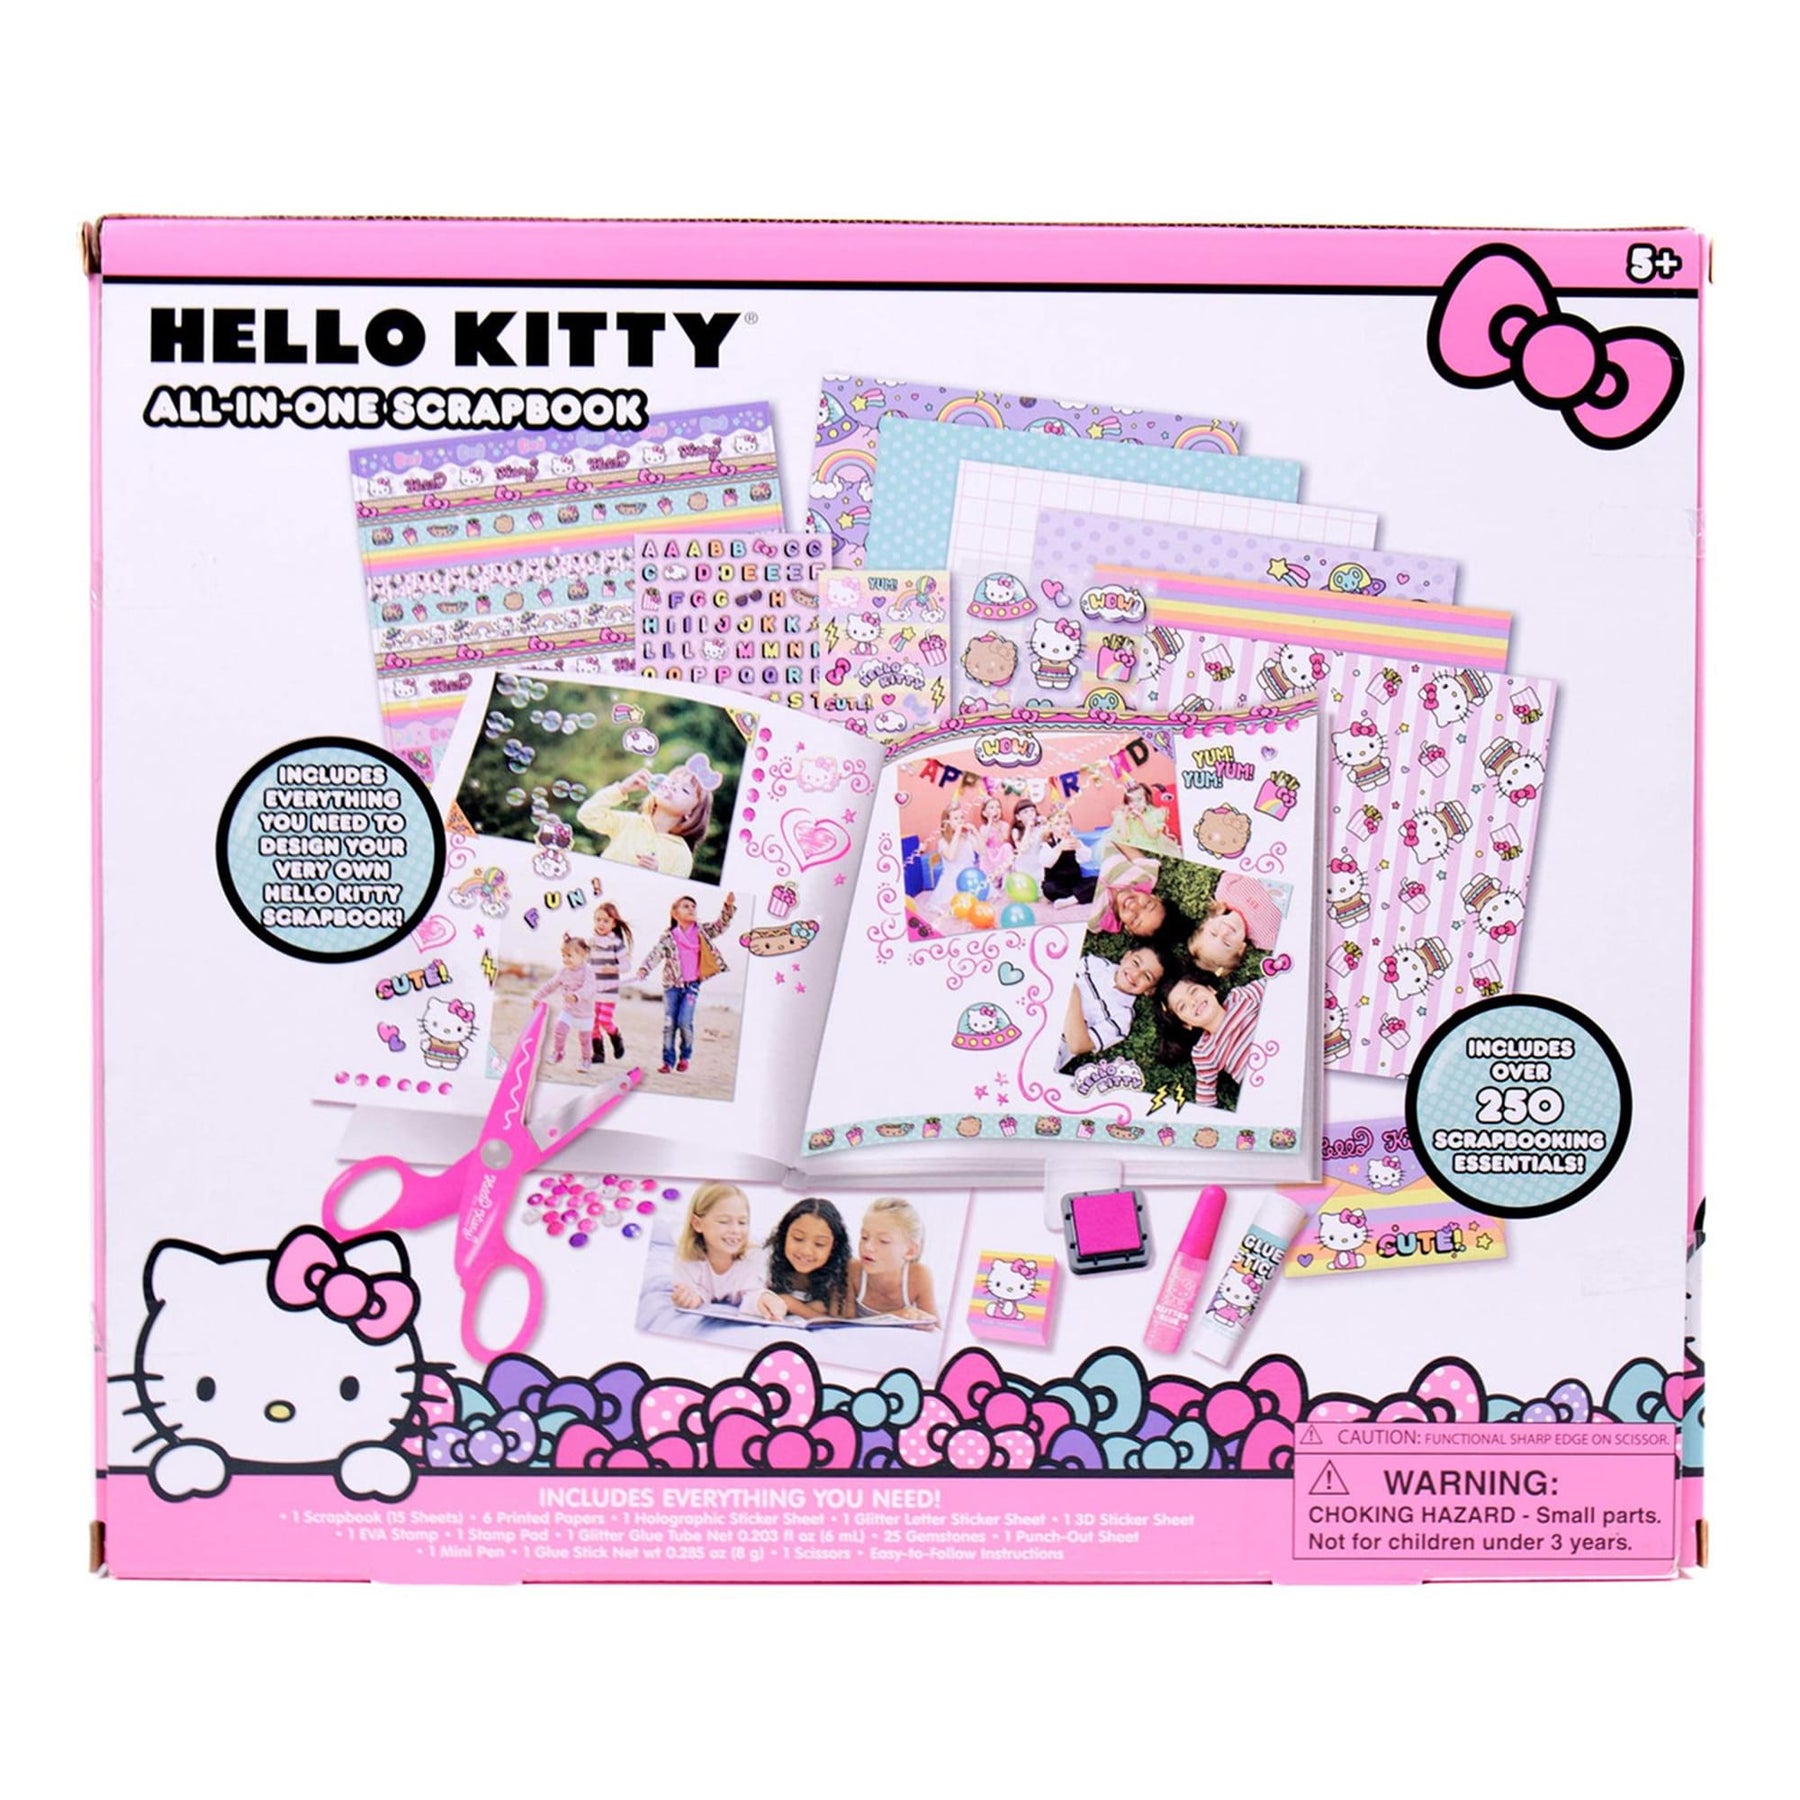 Sanrio Hello Kitty and Friends Design Your Own Scrapbook | Over 250 Essentials